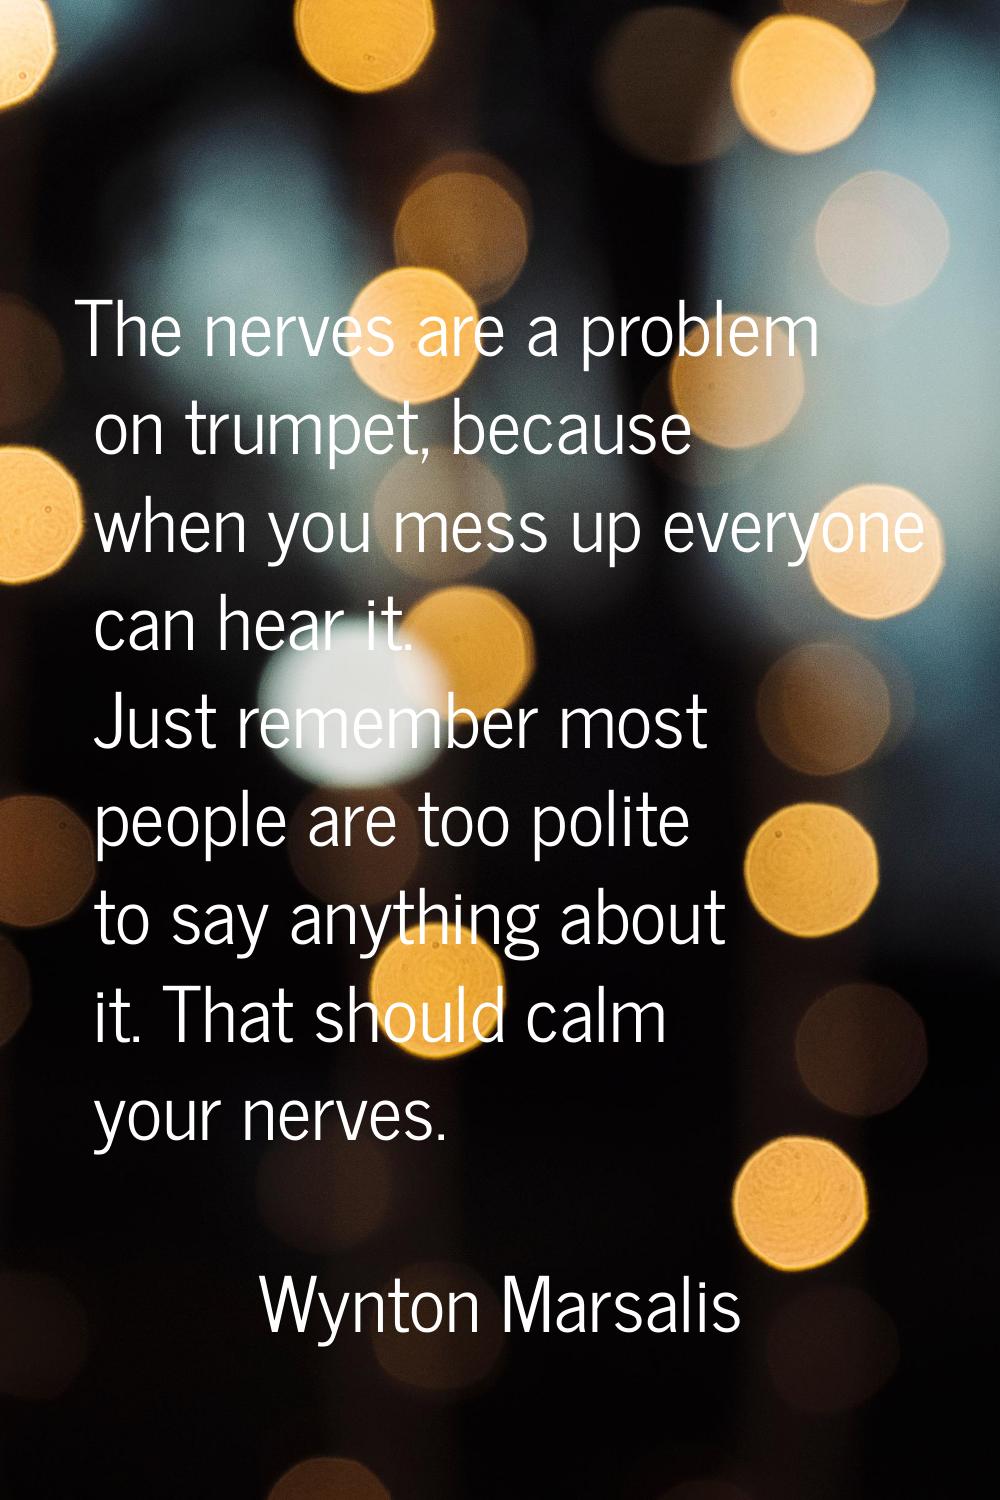 The nerves are a problem on trumpet, because when you mess up everyone can hear it. Just remember m